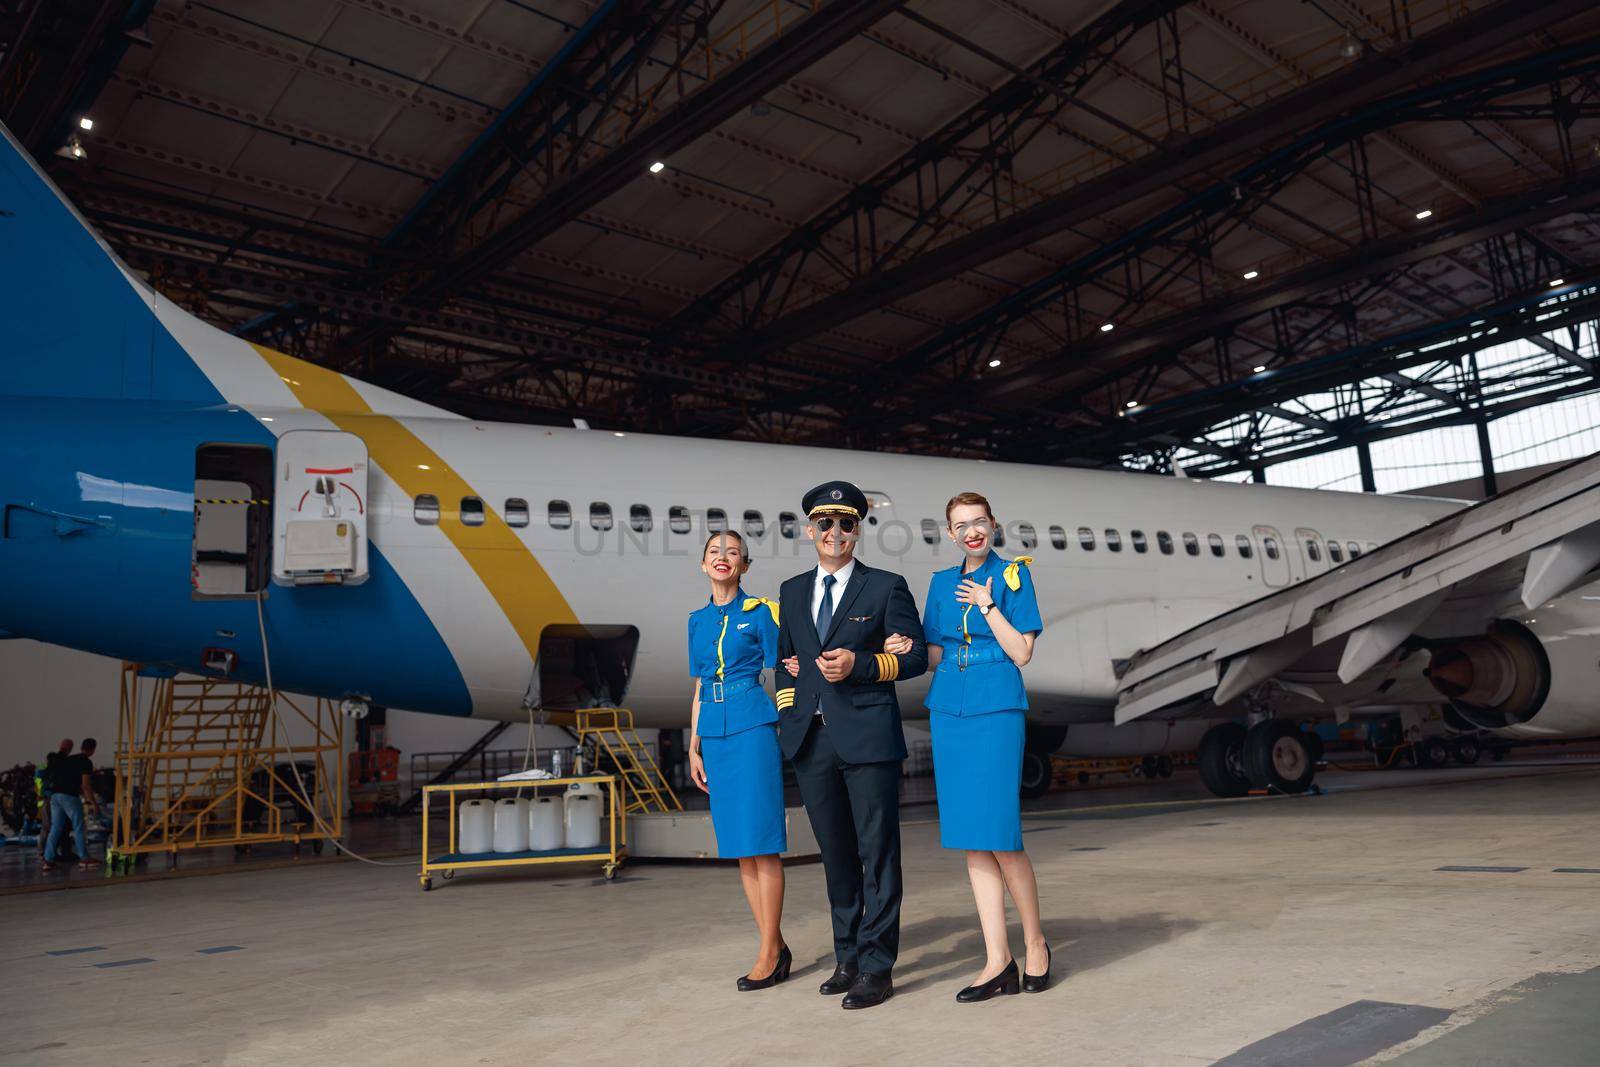 Full length shot of pilot in uniform and aviator sunglasses standing together with two air stewardesses in blue uniform in front of big passenger airplane in airport hangar by Yaroslav_astakhov